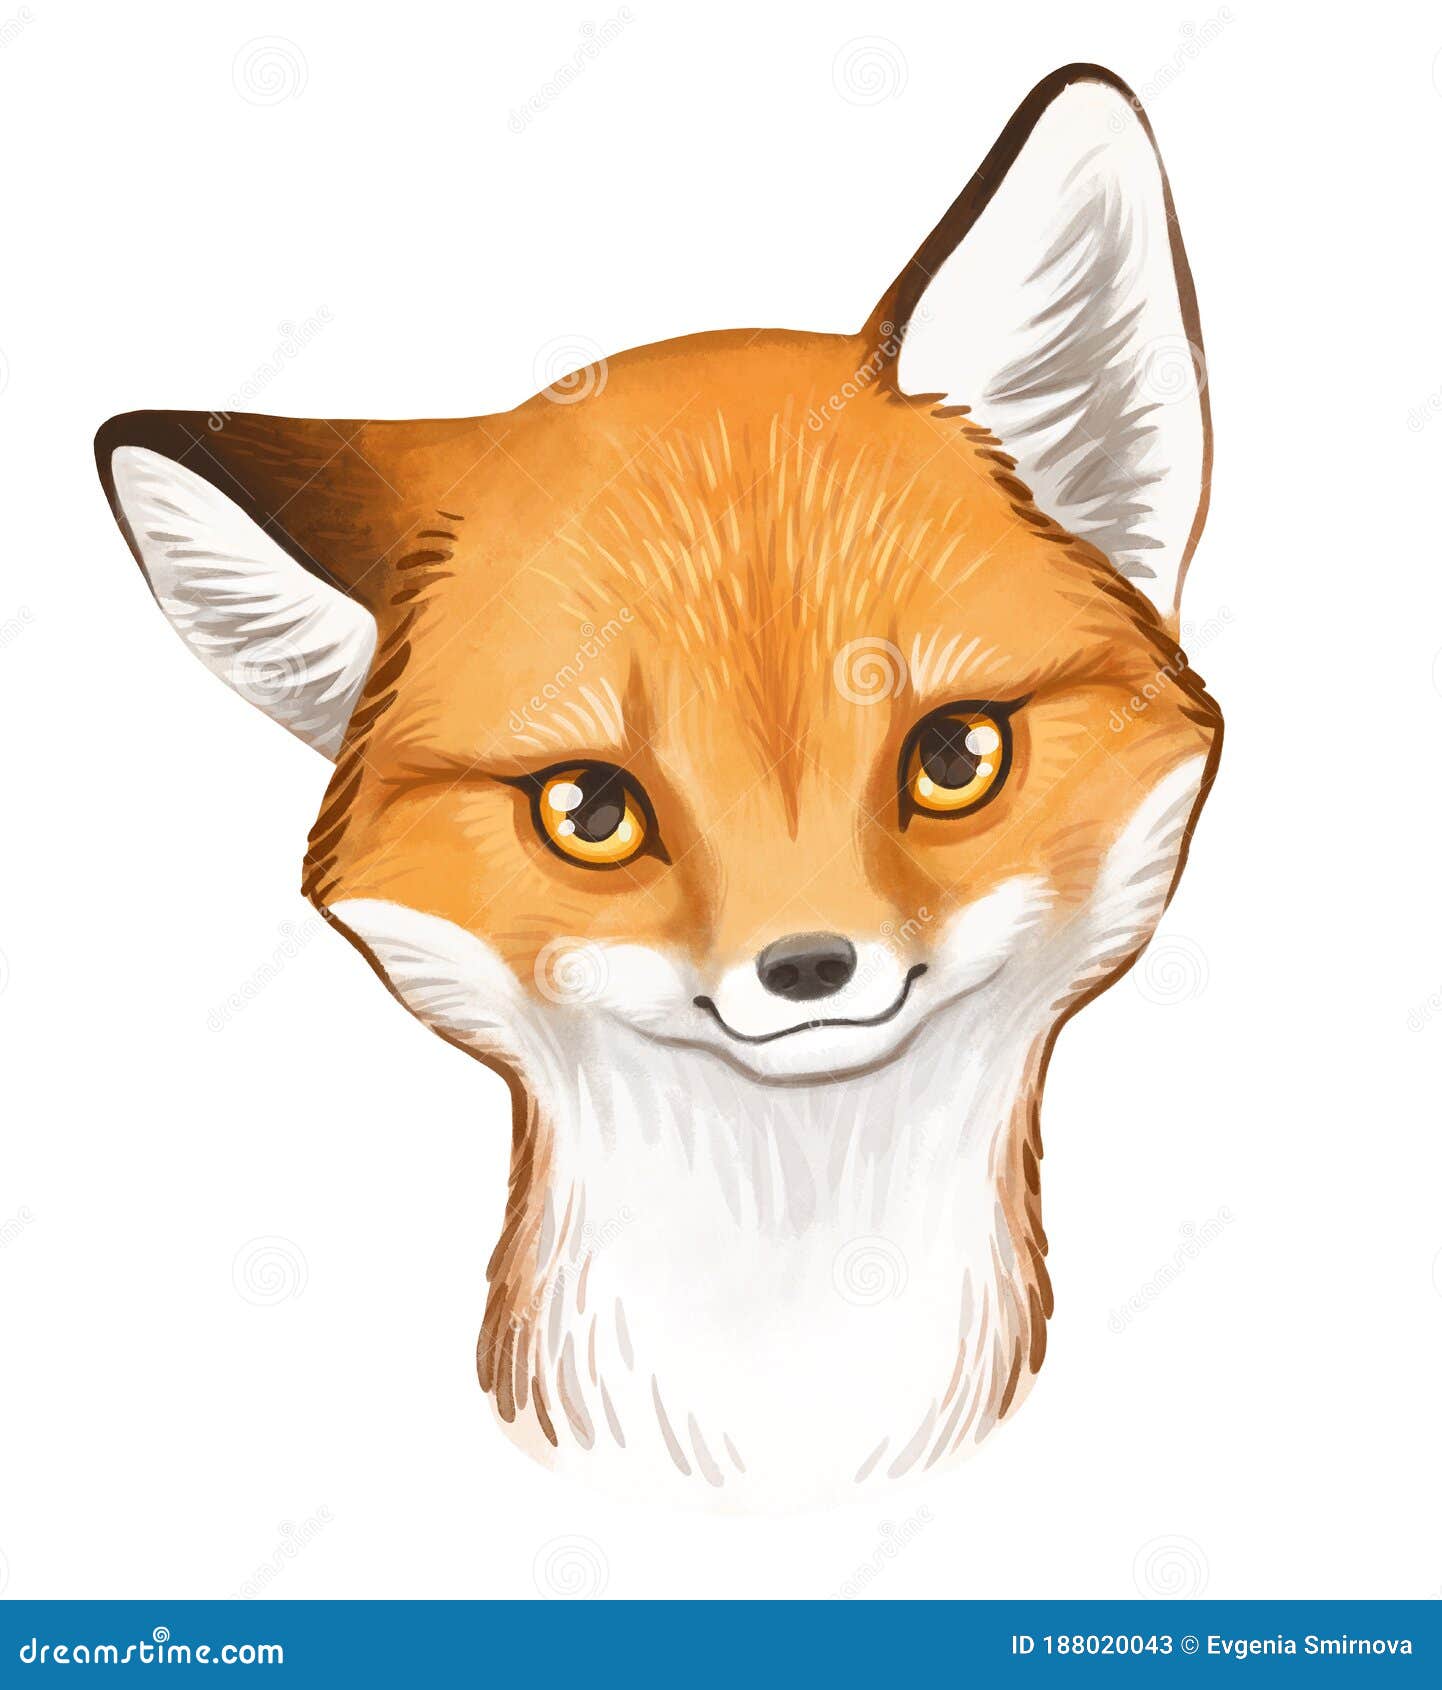 137 Fox Face Drawing Photos Free Royalty Free Stock Photos From Dreamstime